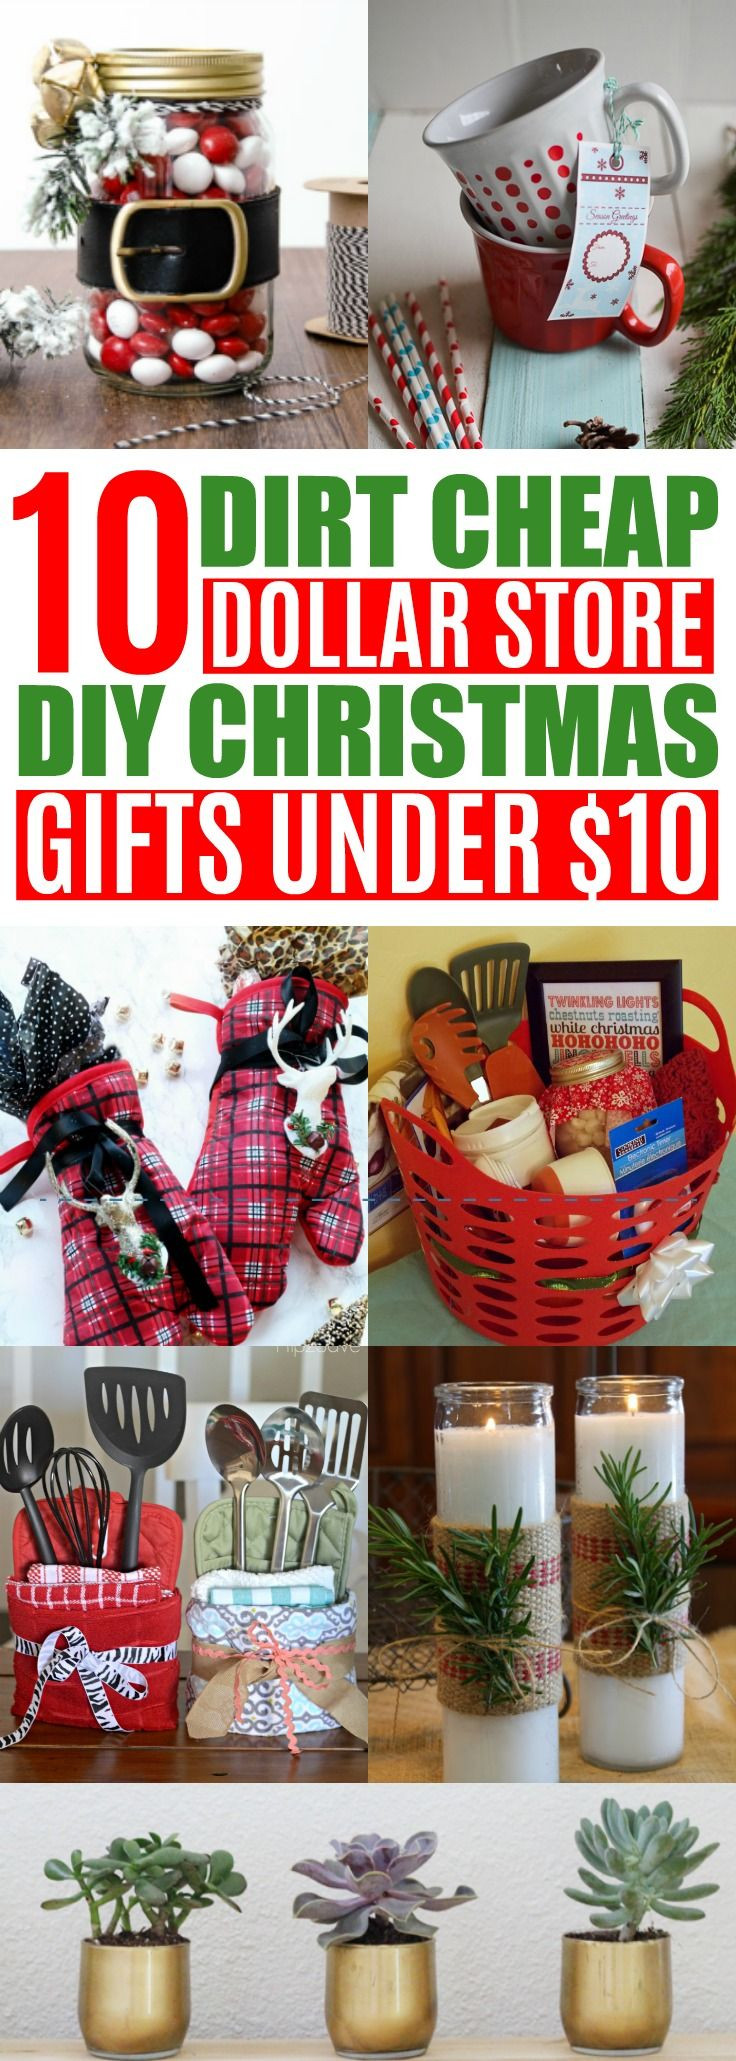 Holiday Gift Ideas For Family
 Best 25 Friends family ideas on Pinterest